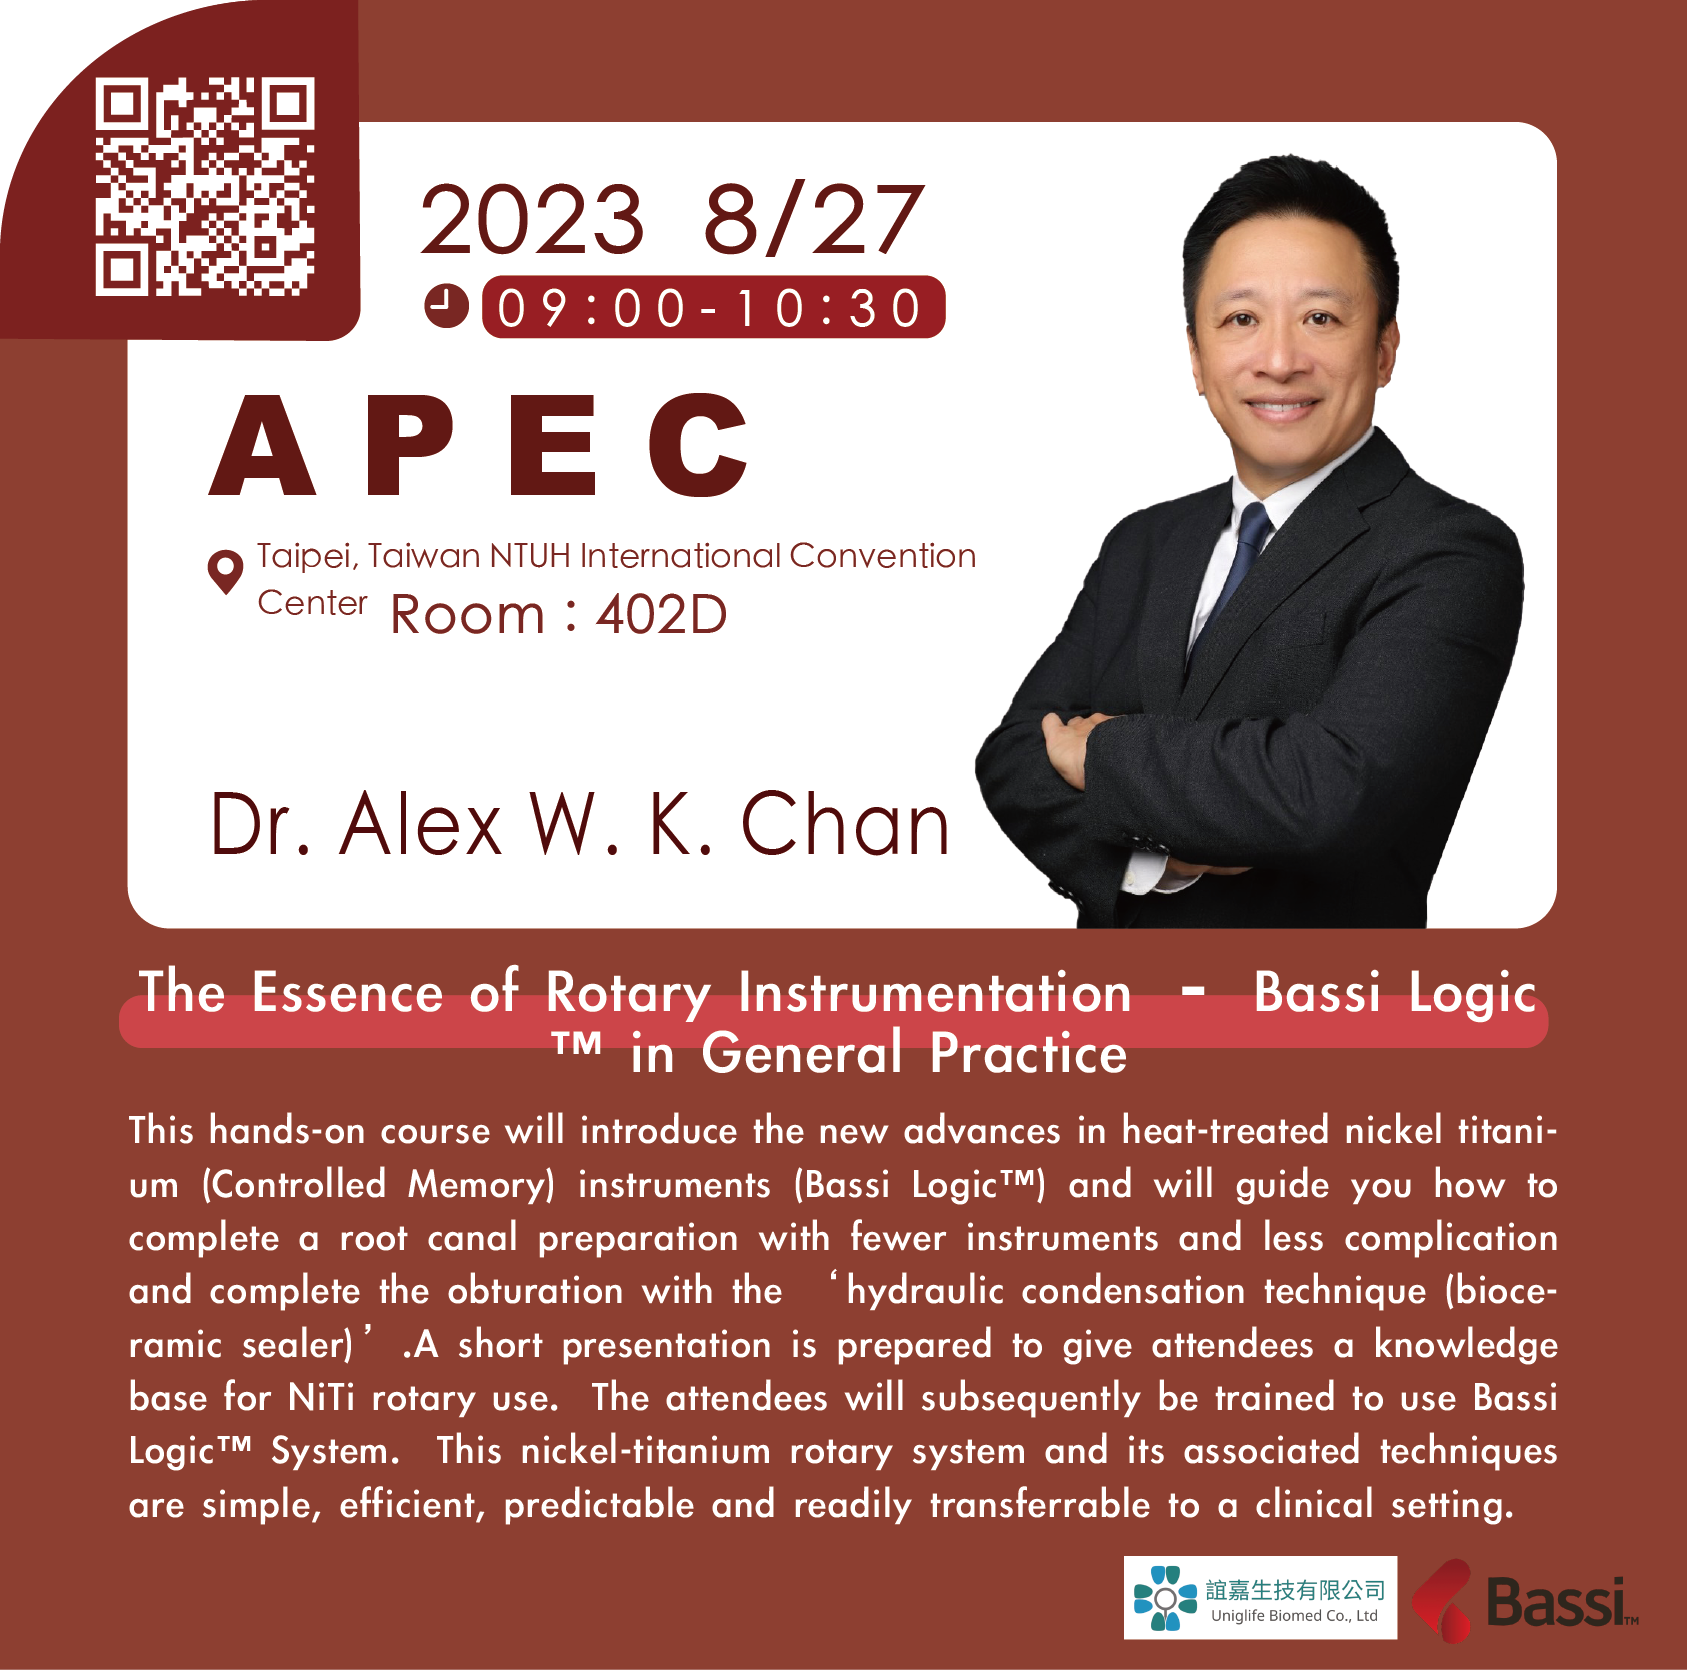 [APEC] The Essence of Rotary Instrumentation – Bassi Logic™ in General Practice - Dr. Alex W. K. Chan